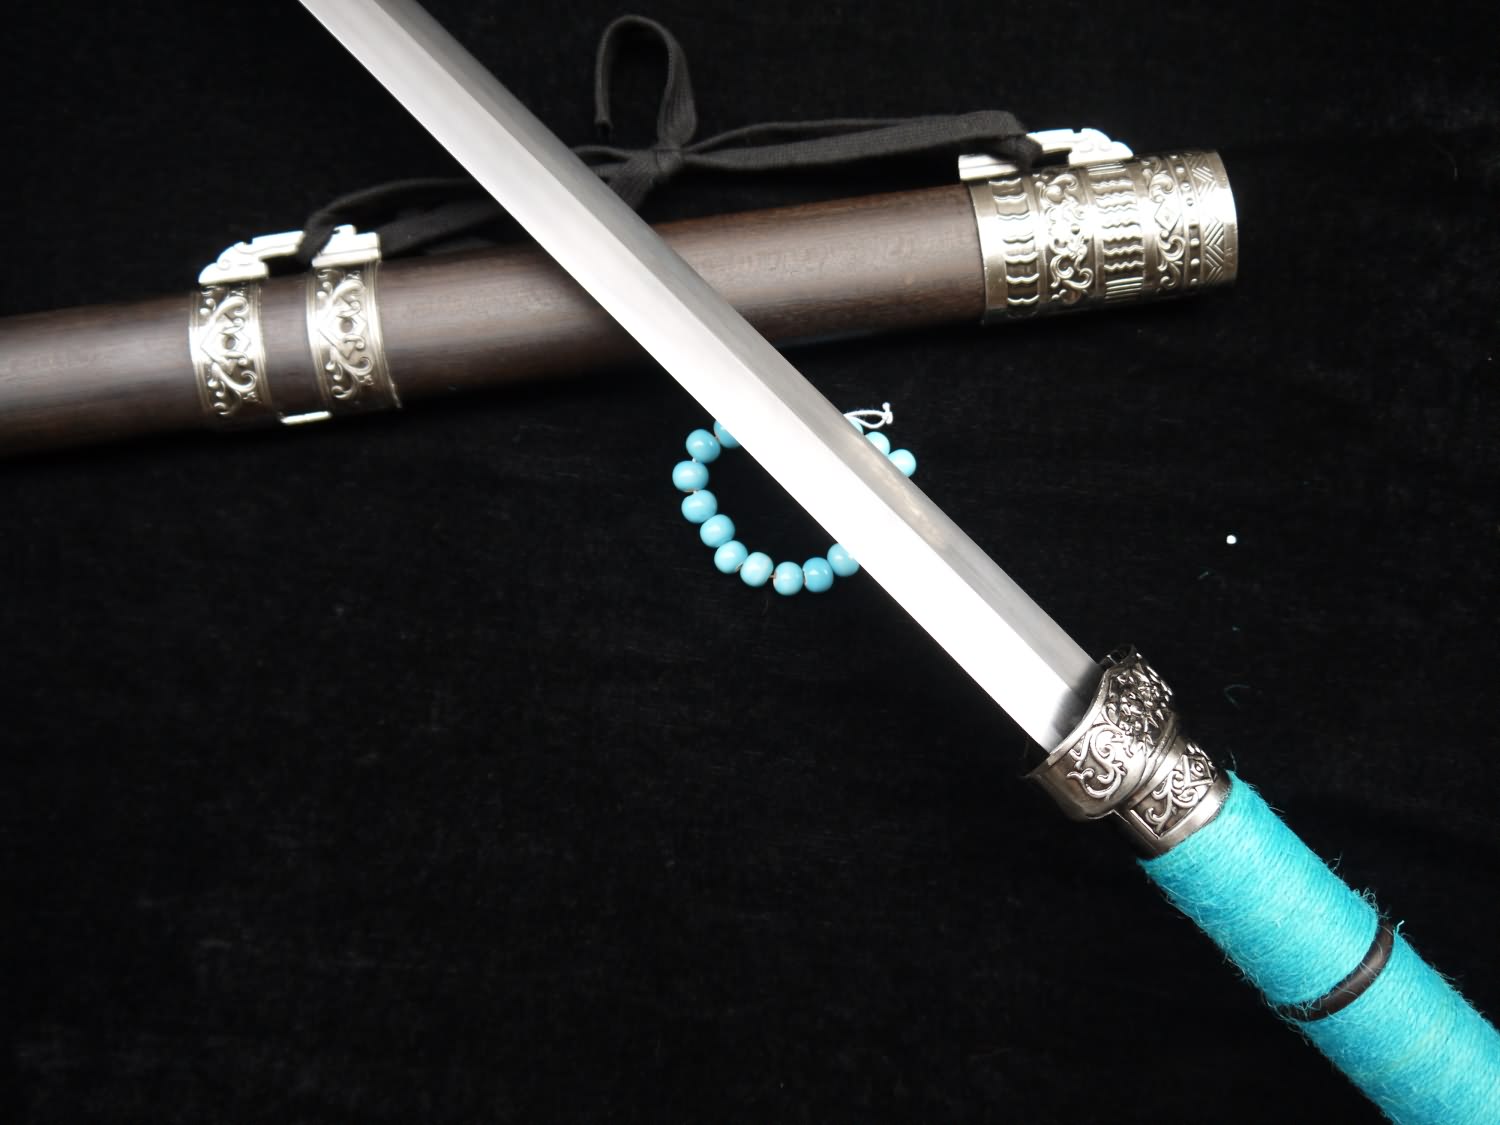 Double-bladed sword(High Manganese Steel,Black scabbard,Alloy)Length 39" - Chinese sword shop